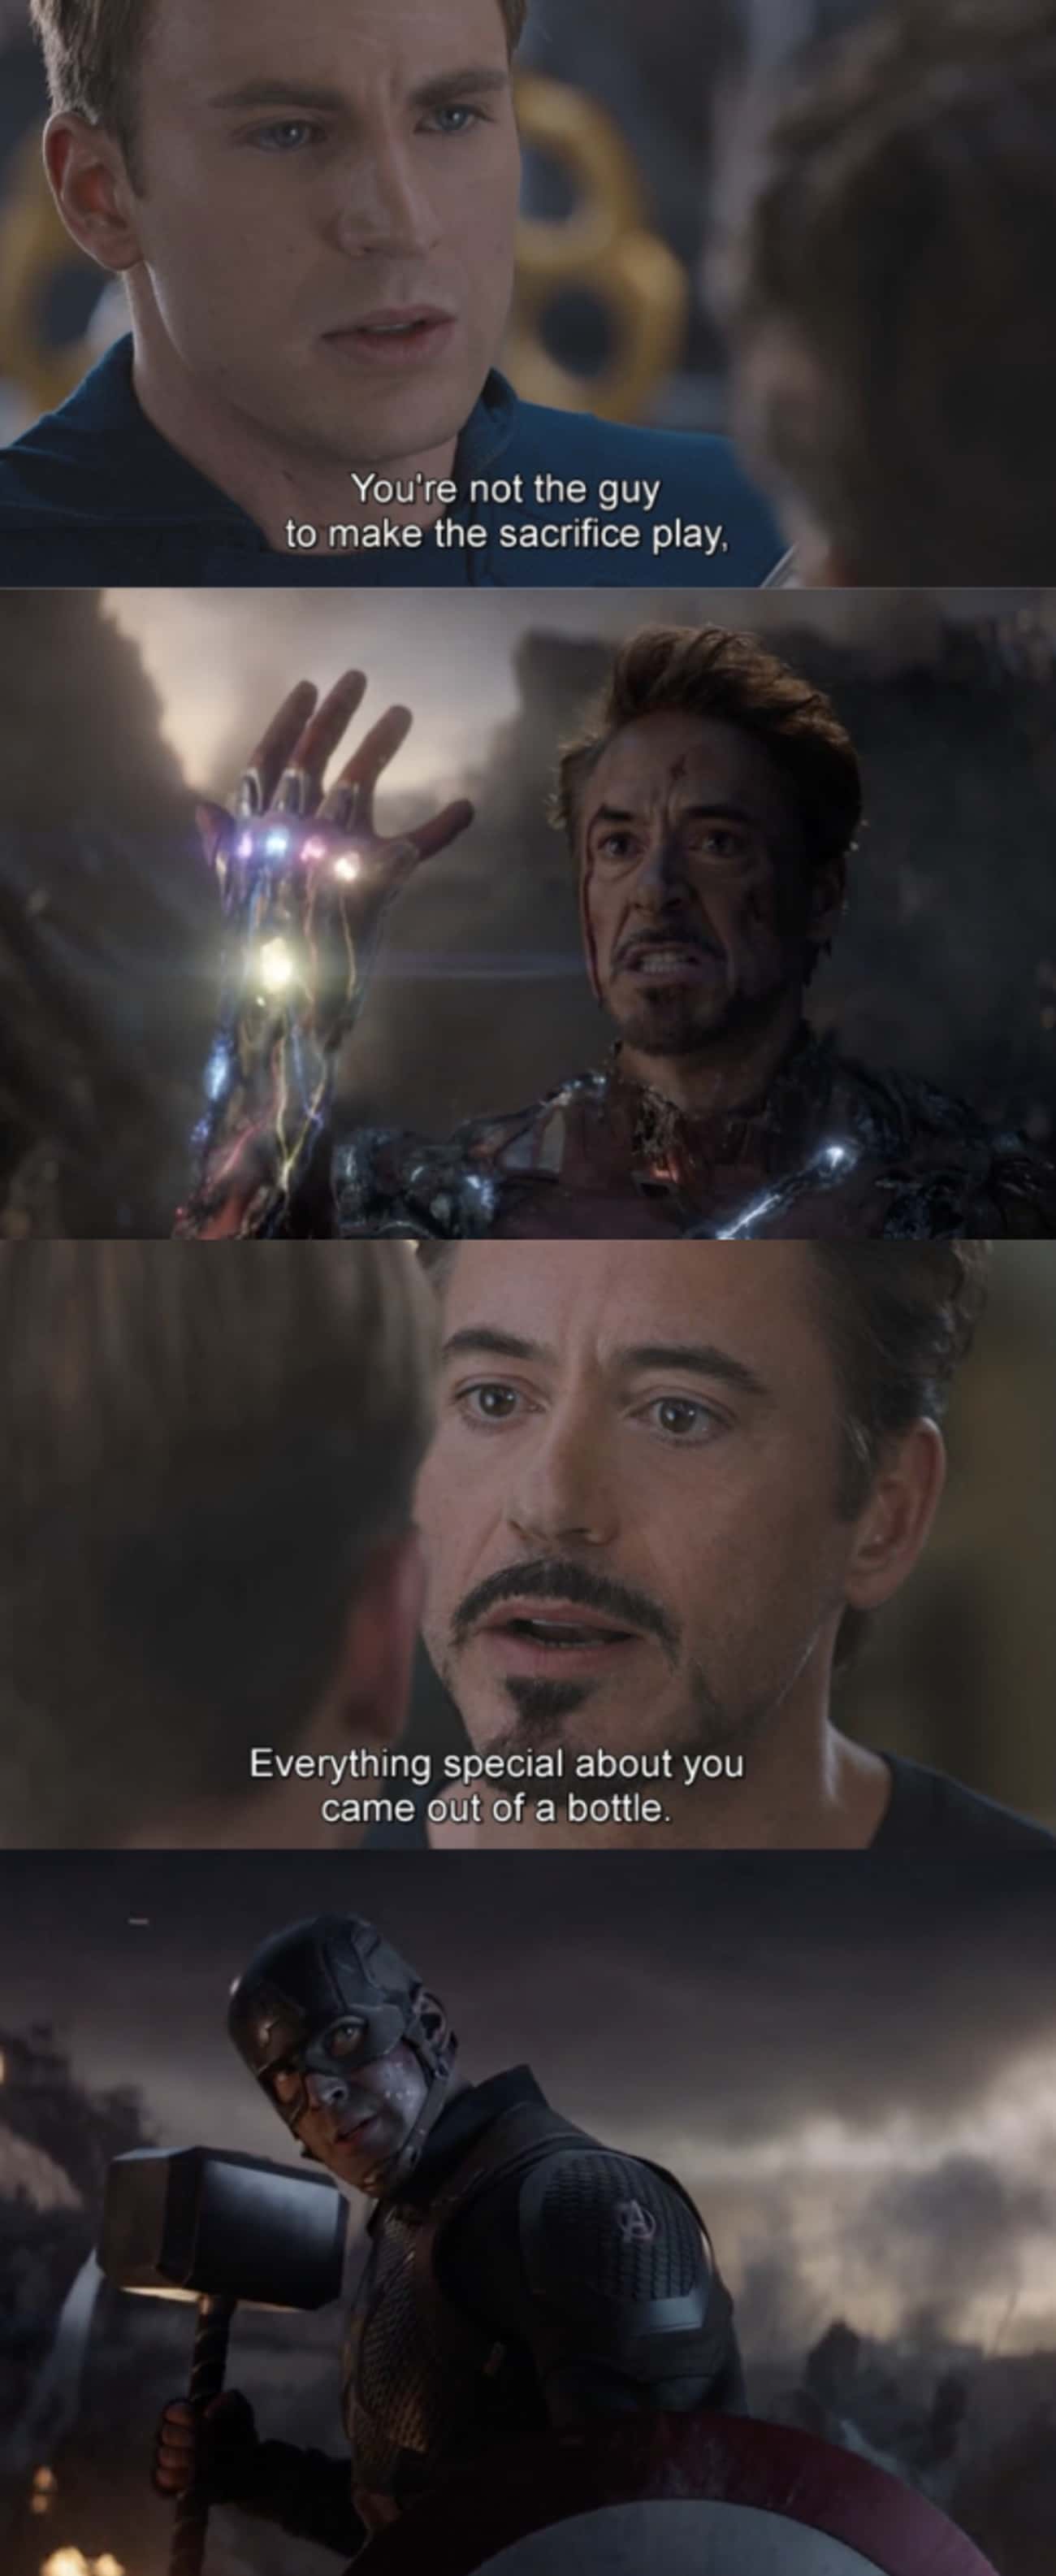 Steve And Tony's Criticisms Of Each Other Come Full Circle From 'Avengers' To 'Endgame'